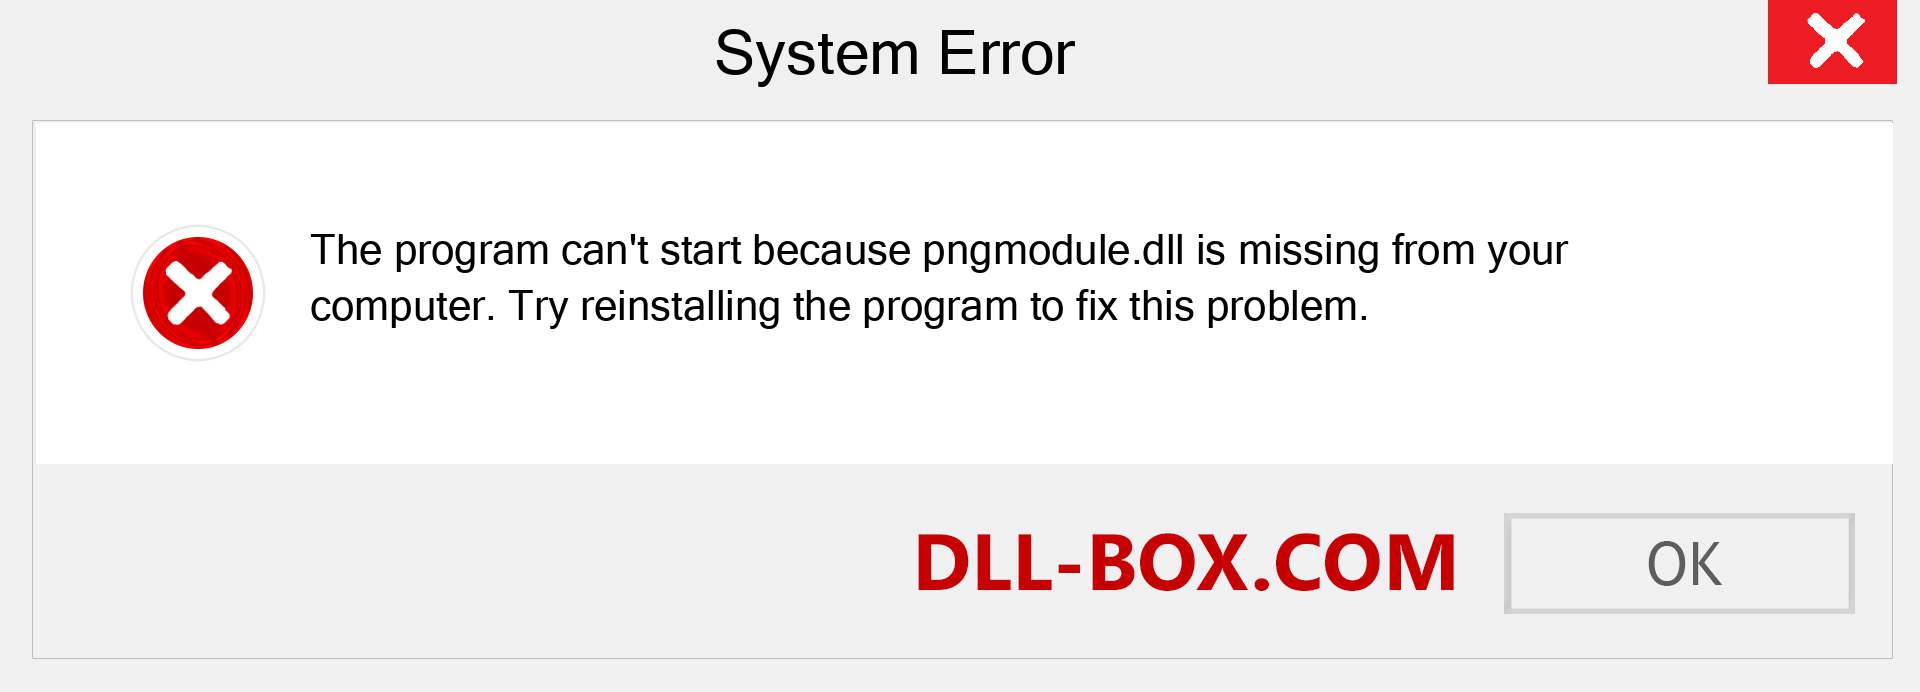  pngmodule.dll file is missing?. Download for Windows 7, 8, 10 - Fix  pngmodule dll Missing Error on Windows, photos, images